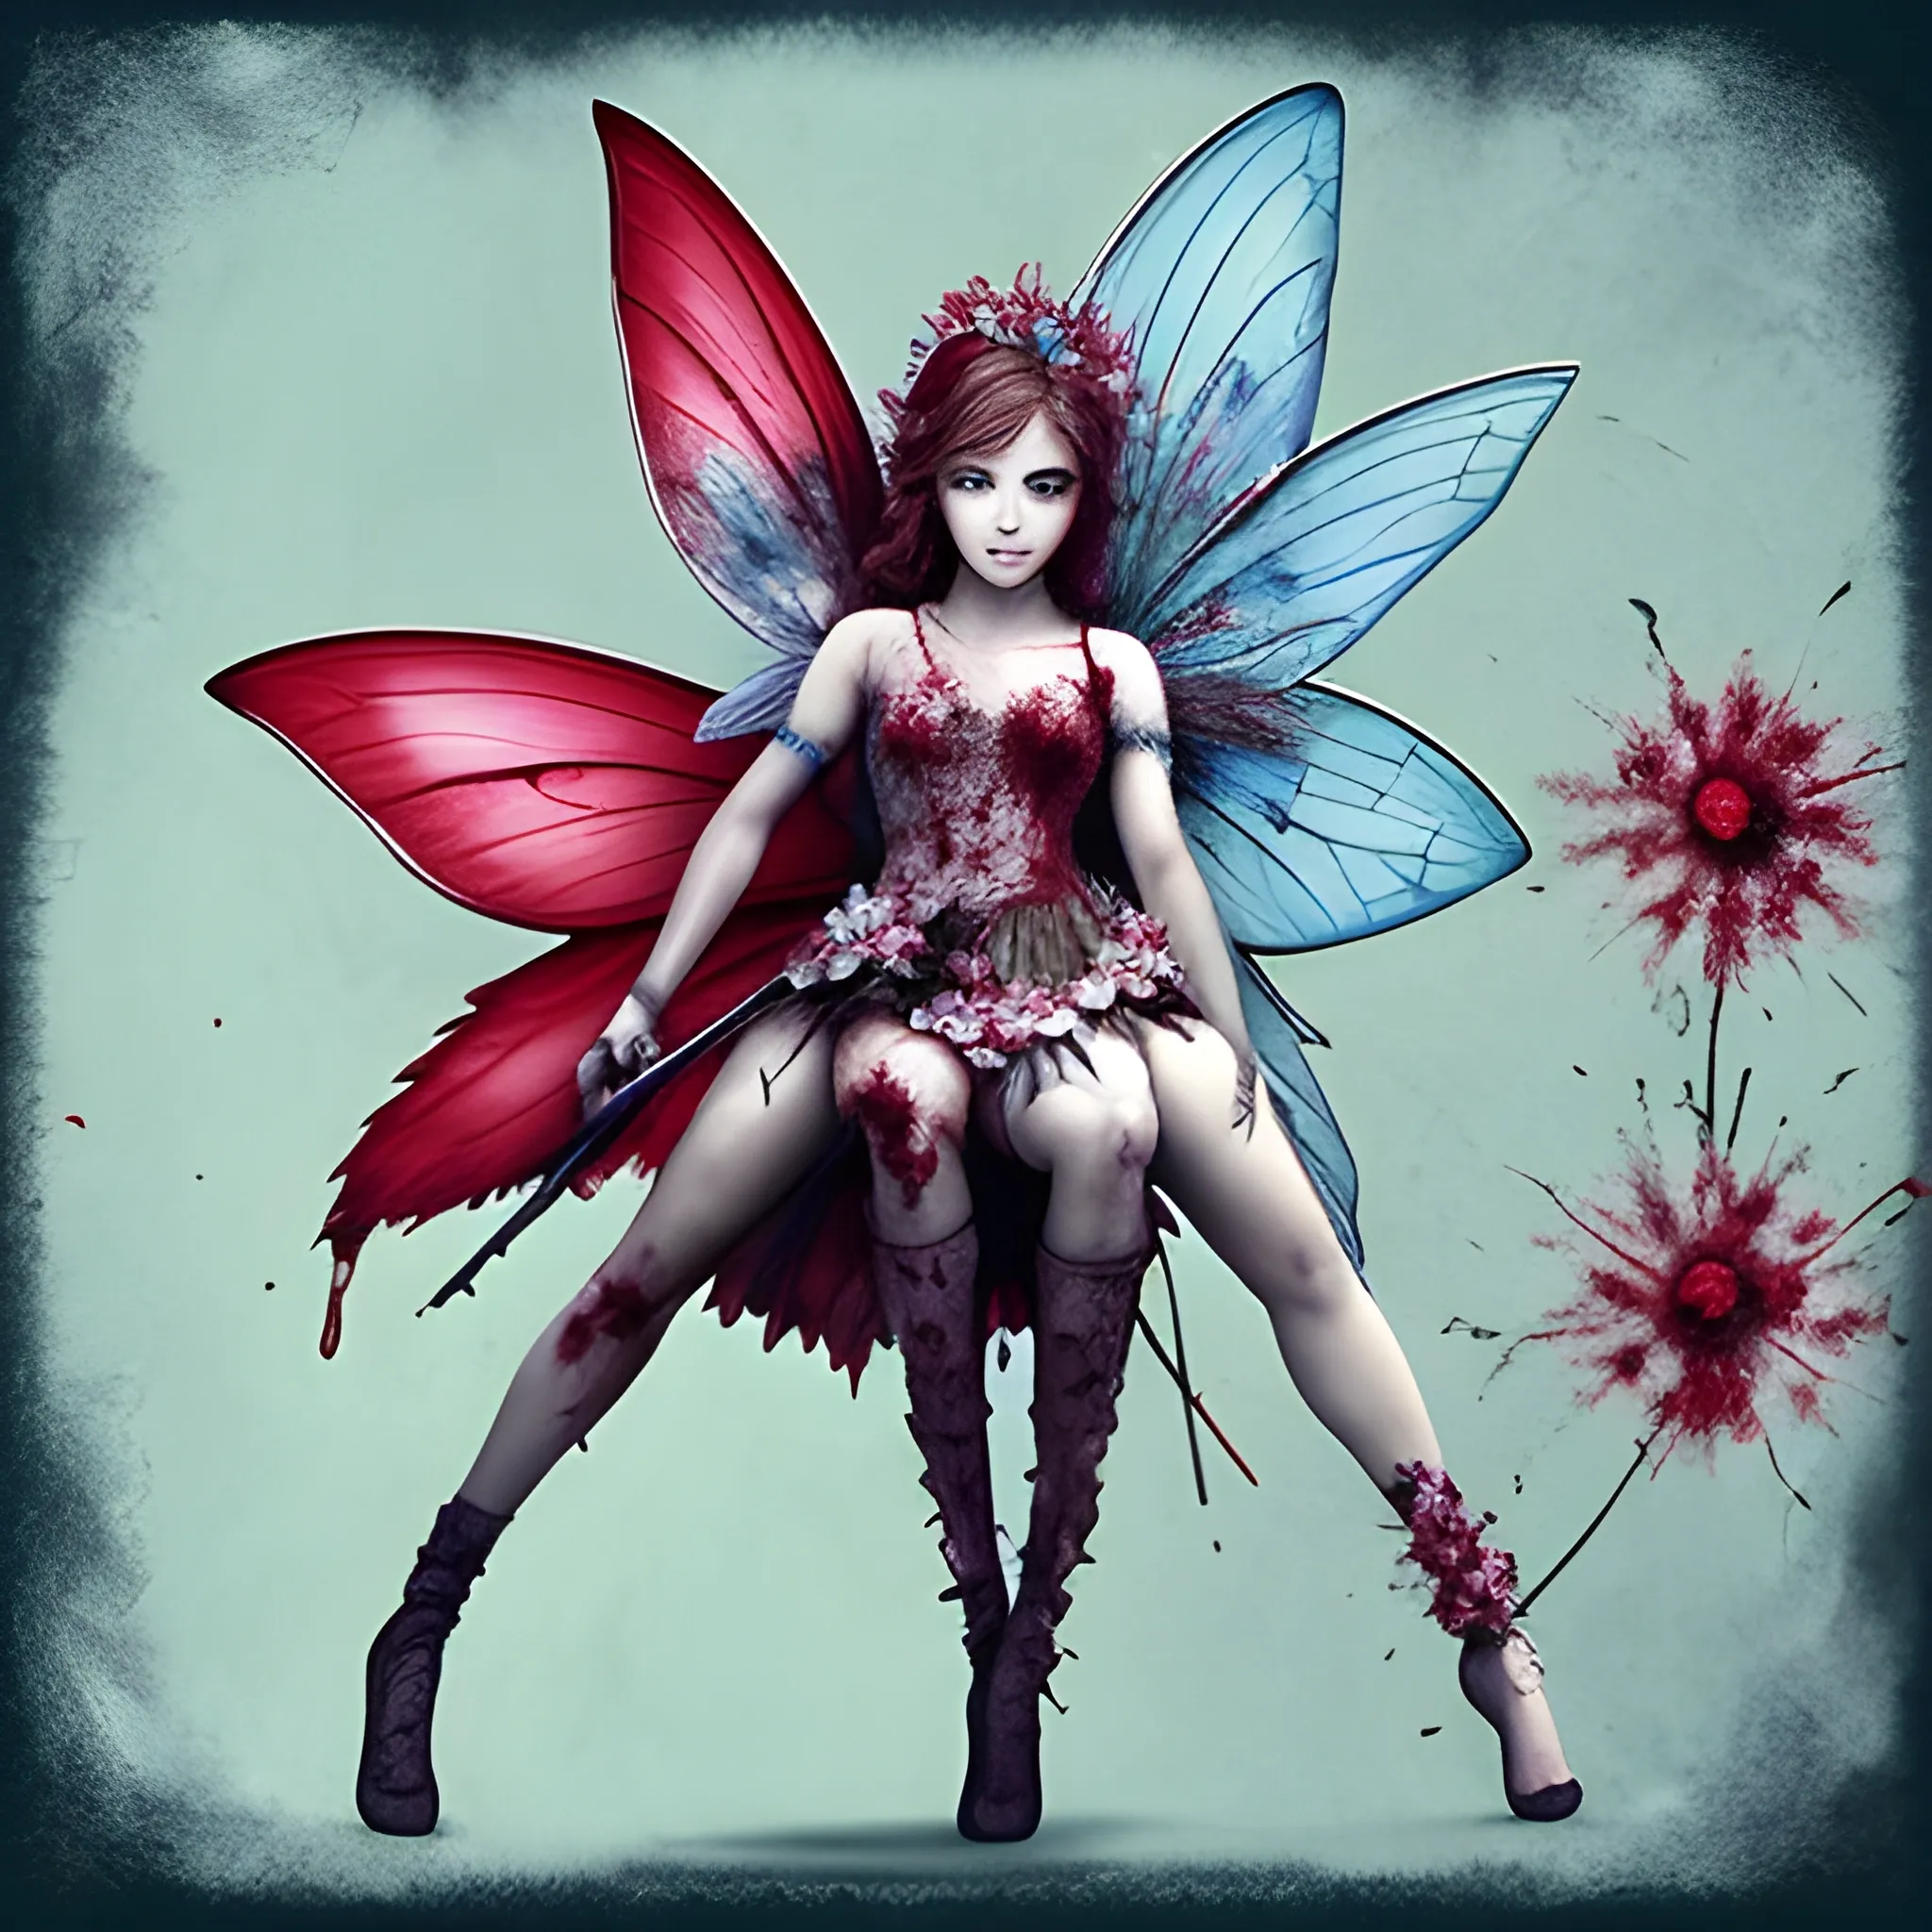 beutifules flower with a blood splatter and a fairy prepared to fight